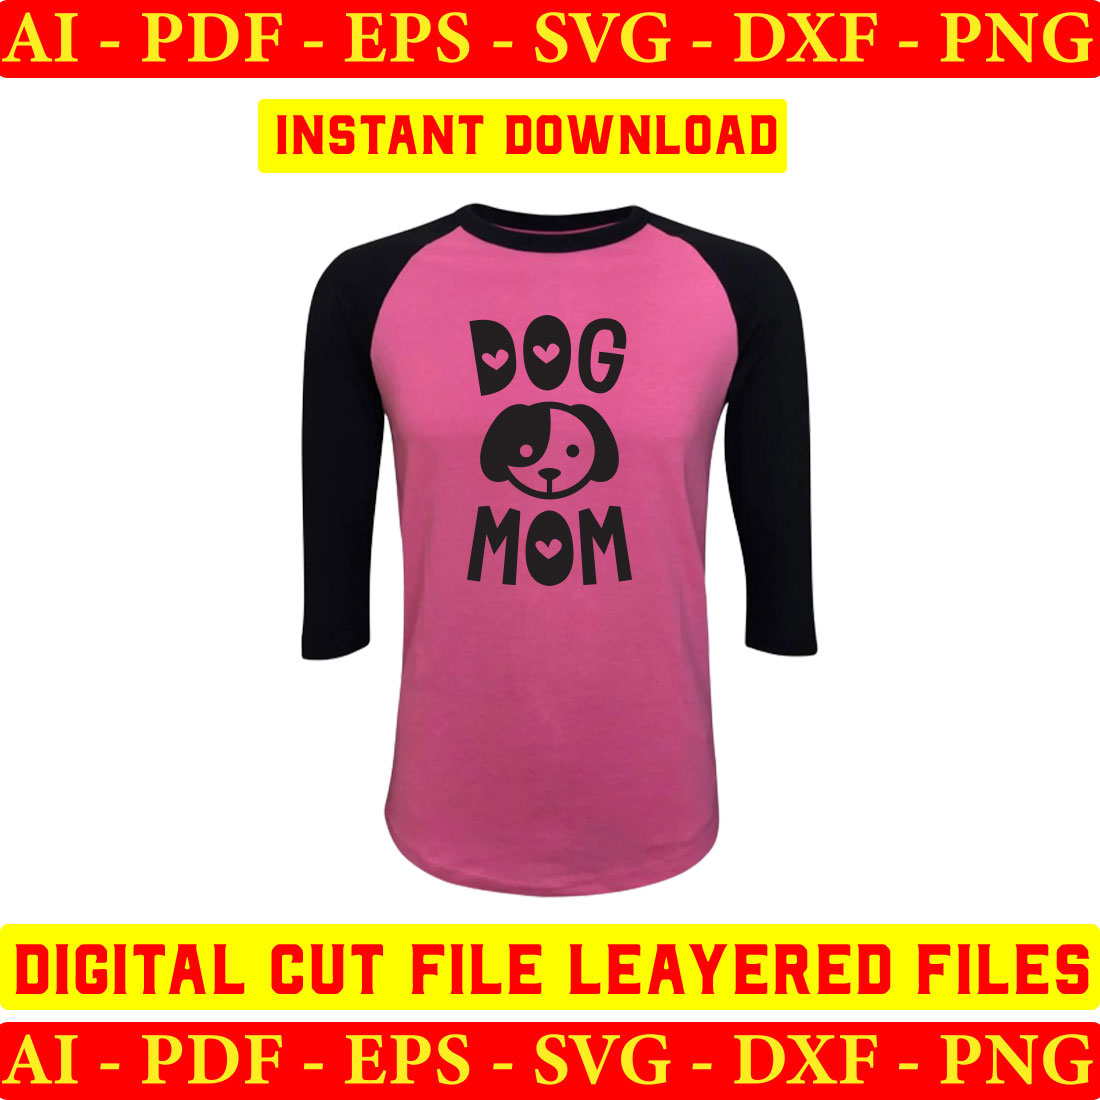 Pink and black shirt with a dog mom on it.